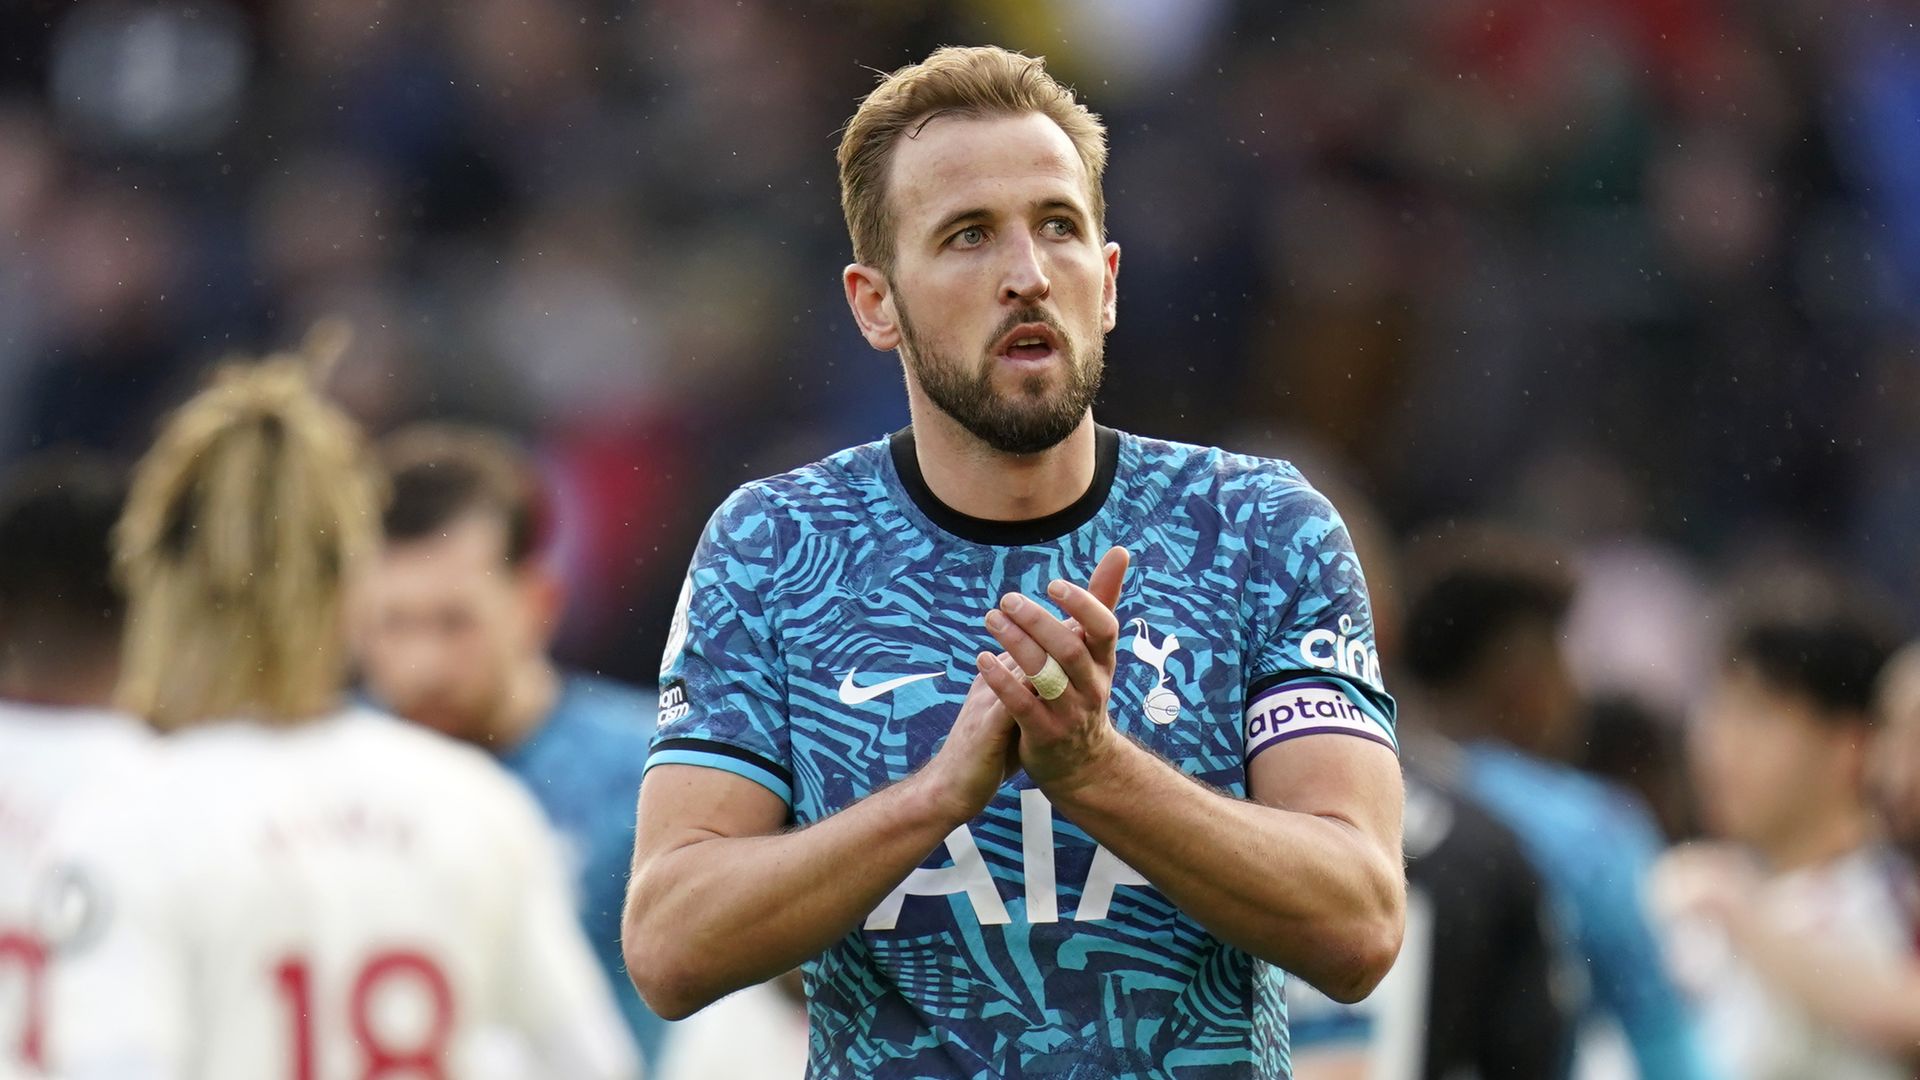 Will Kane stay at Spurs without CL football?